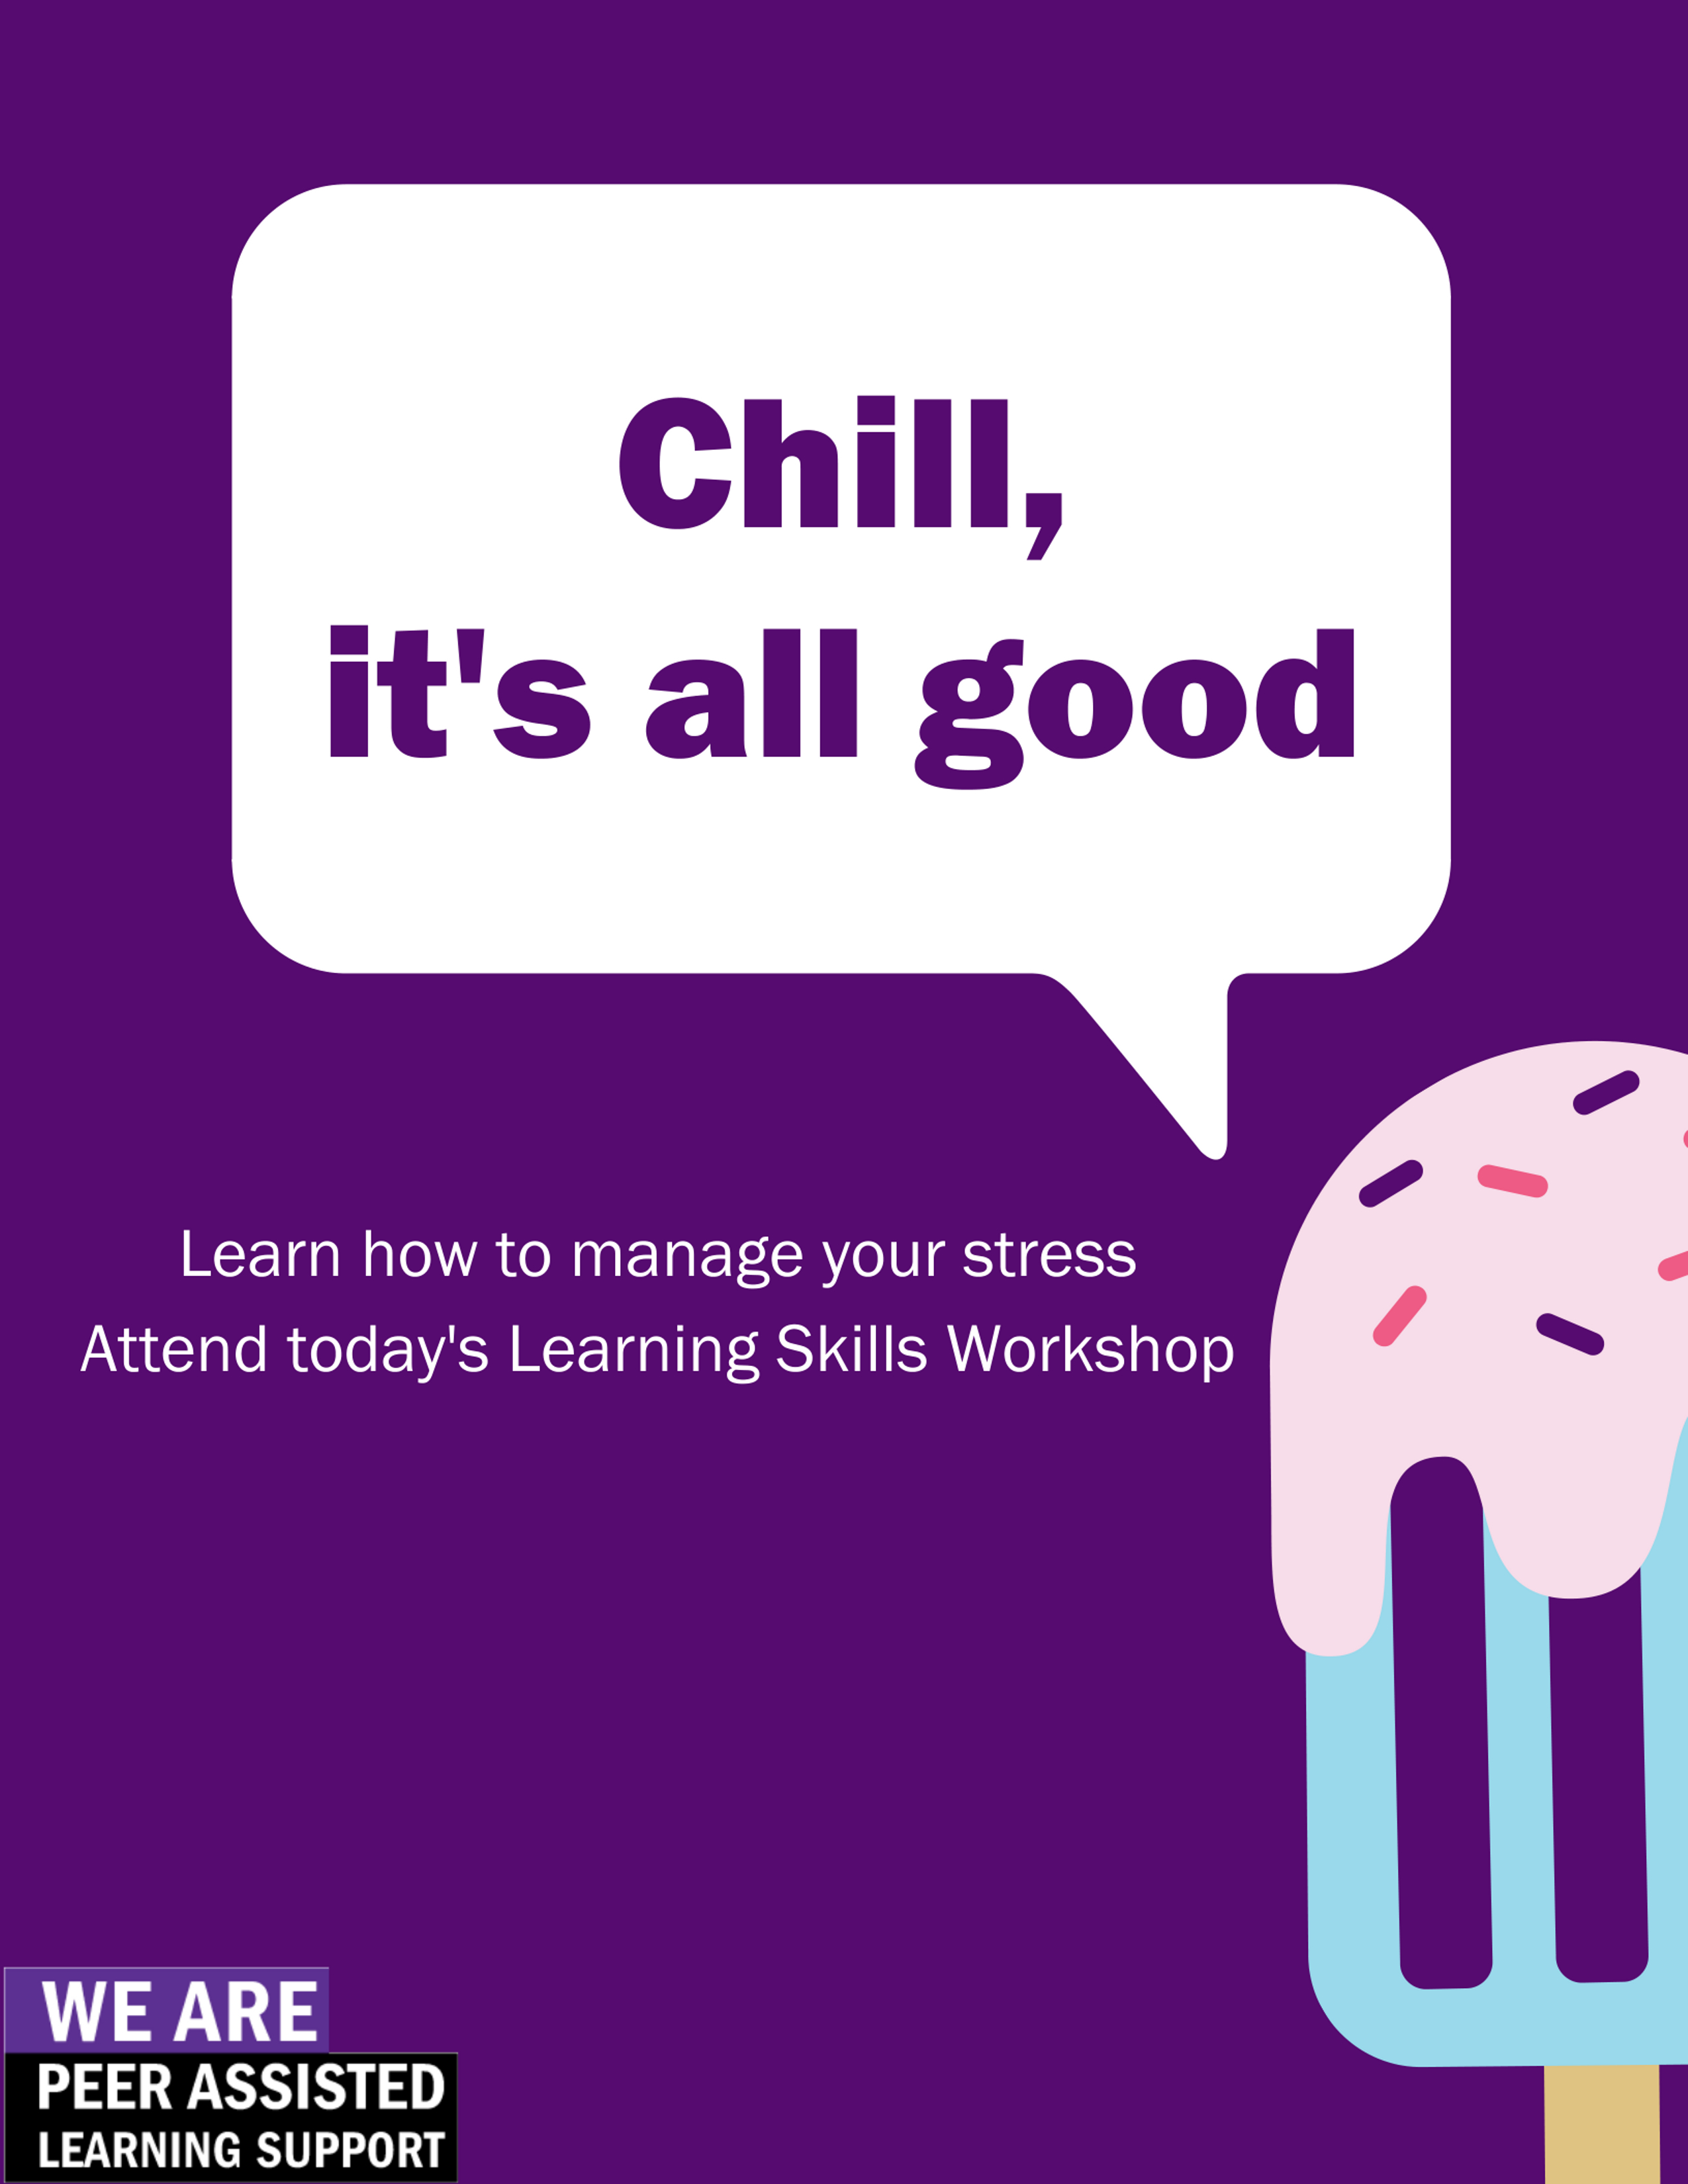 An image of a popsicle on a bright purple background. Background text says “Chill, it’s all good. Learn how to manage your stres